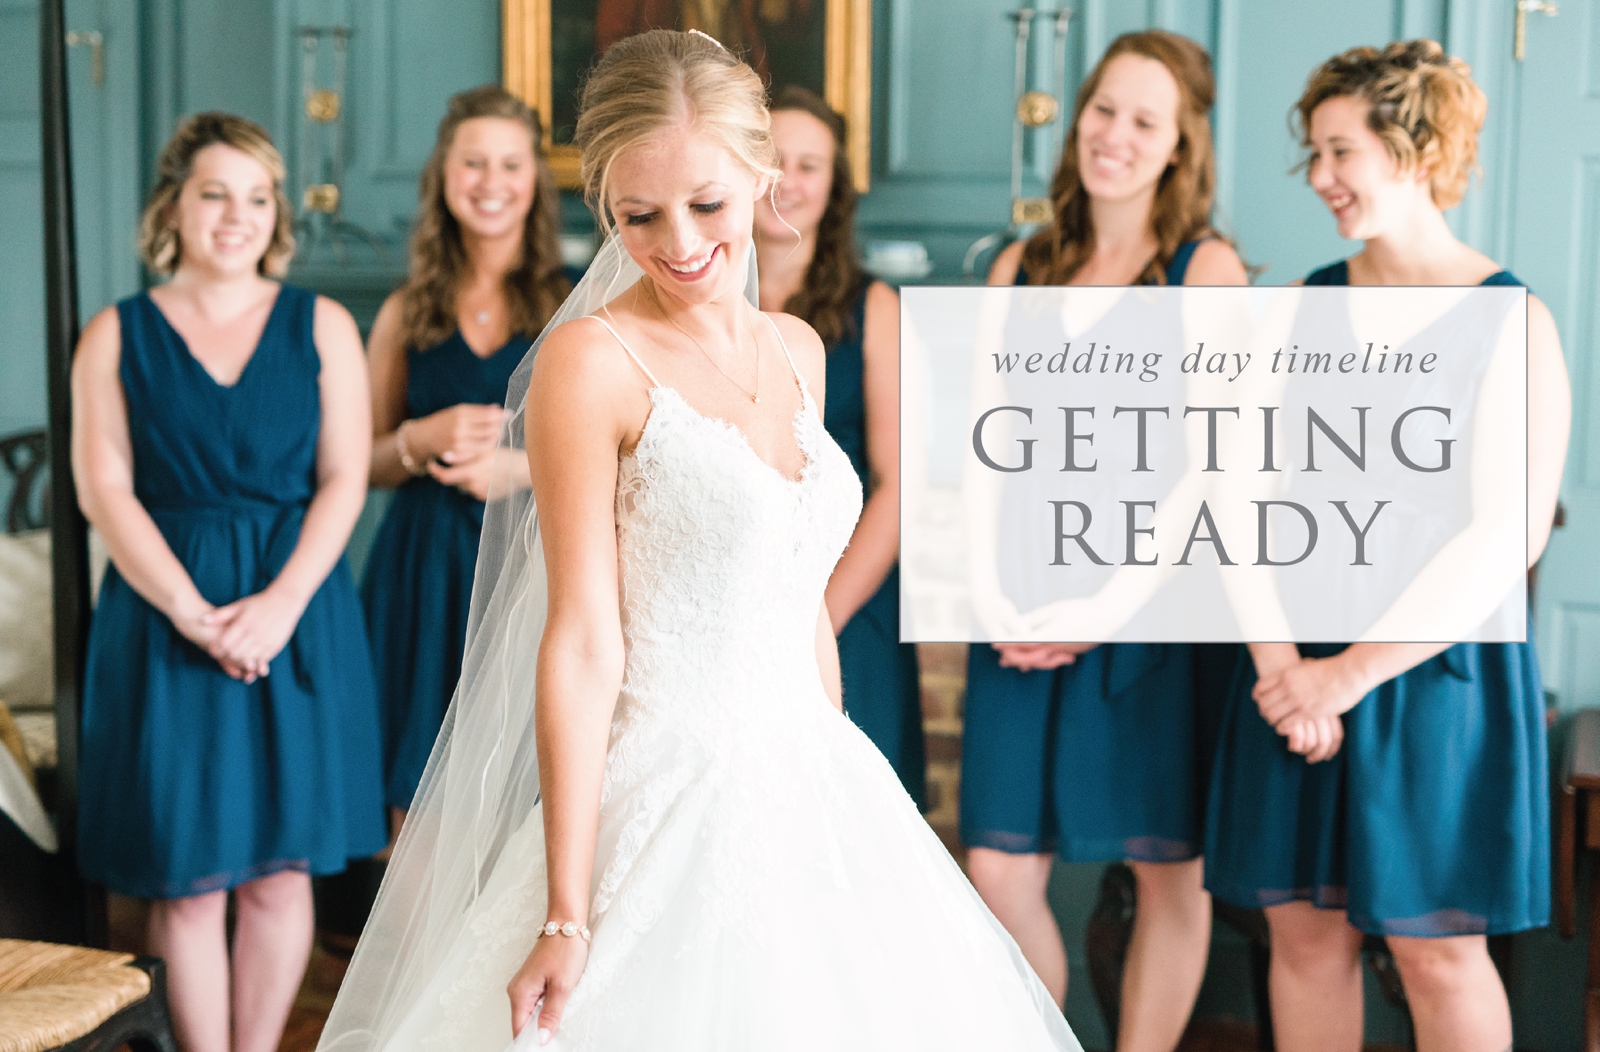 planning your wedding day timeline | getting ready